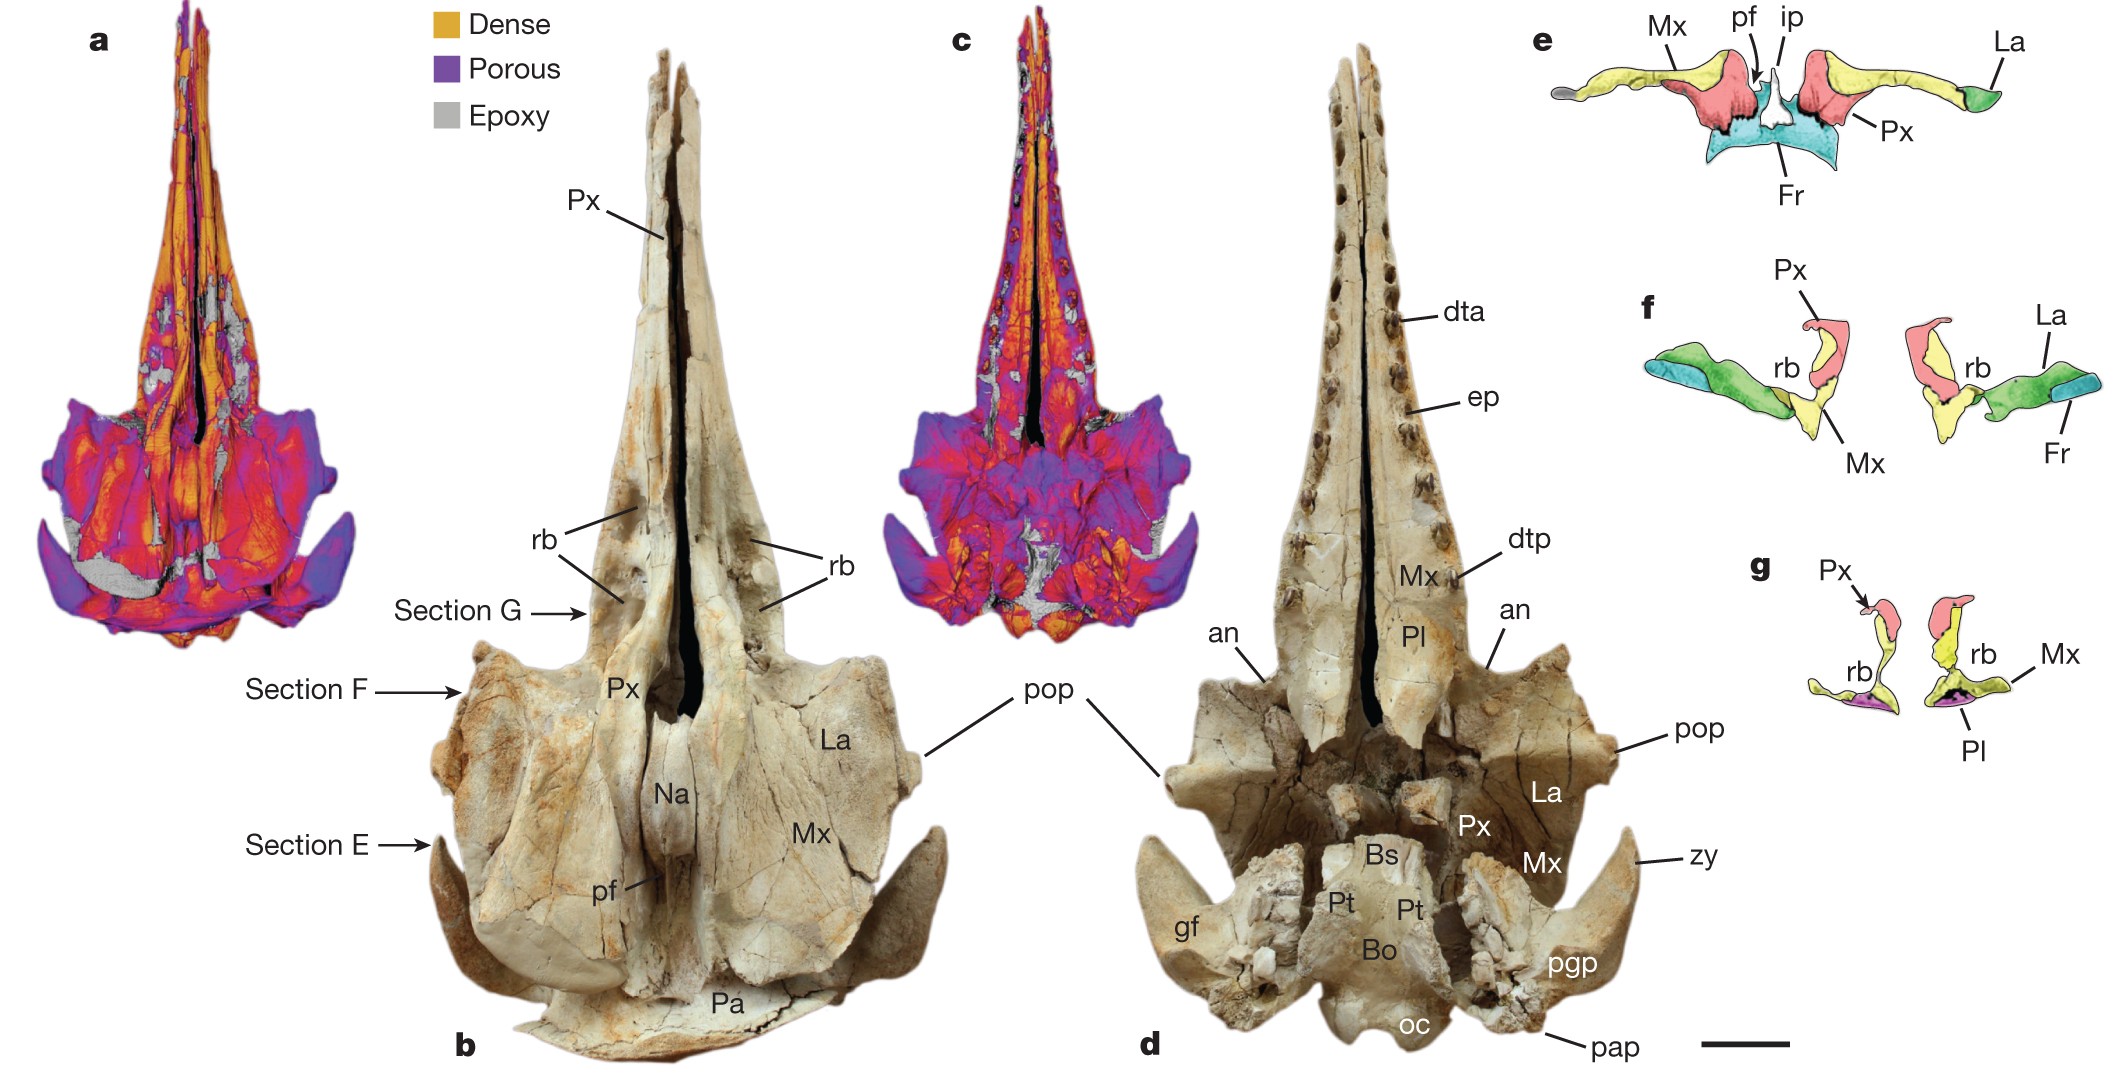 New specimens and species of the Oligocene toothed baleen whale